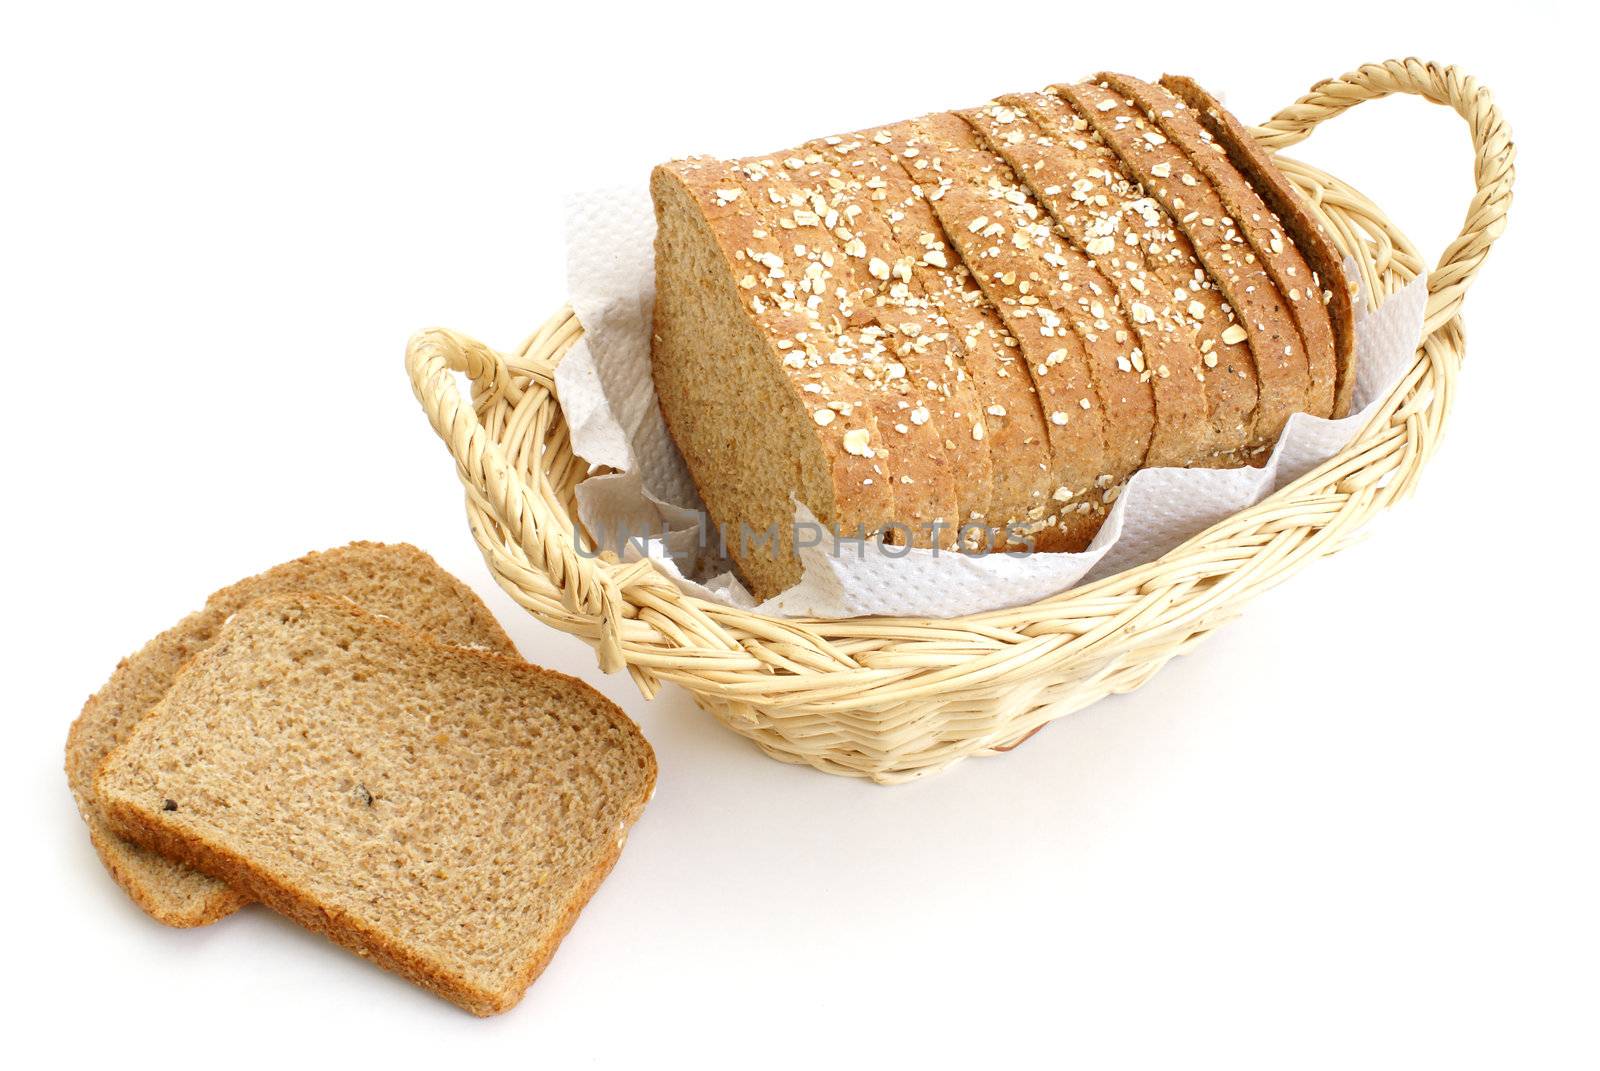 A loaf of honey and oats bread in a basket.